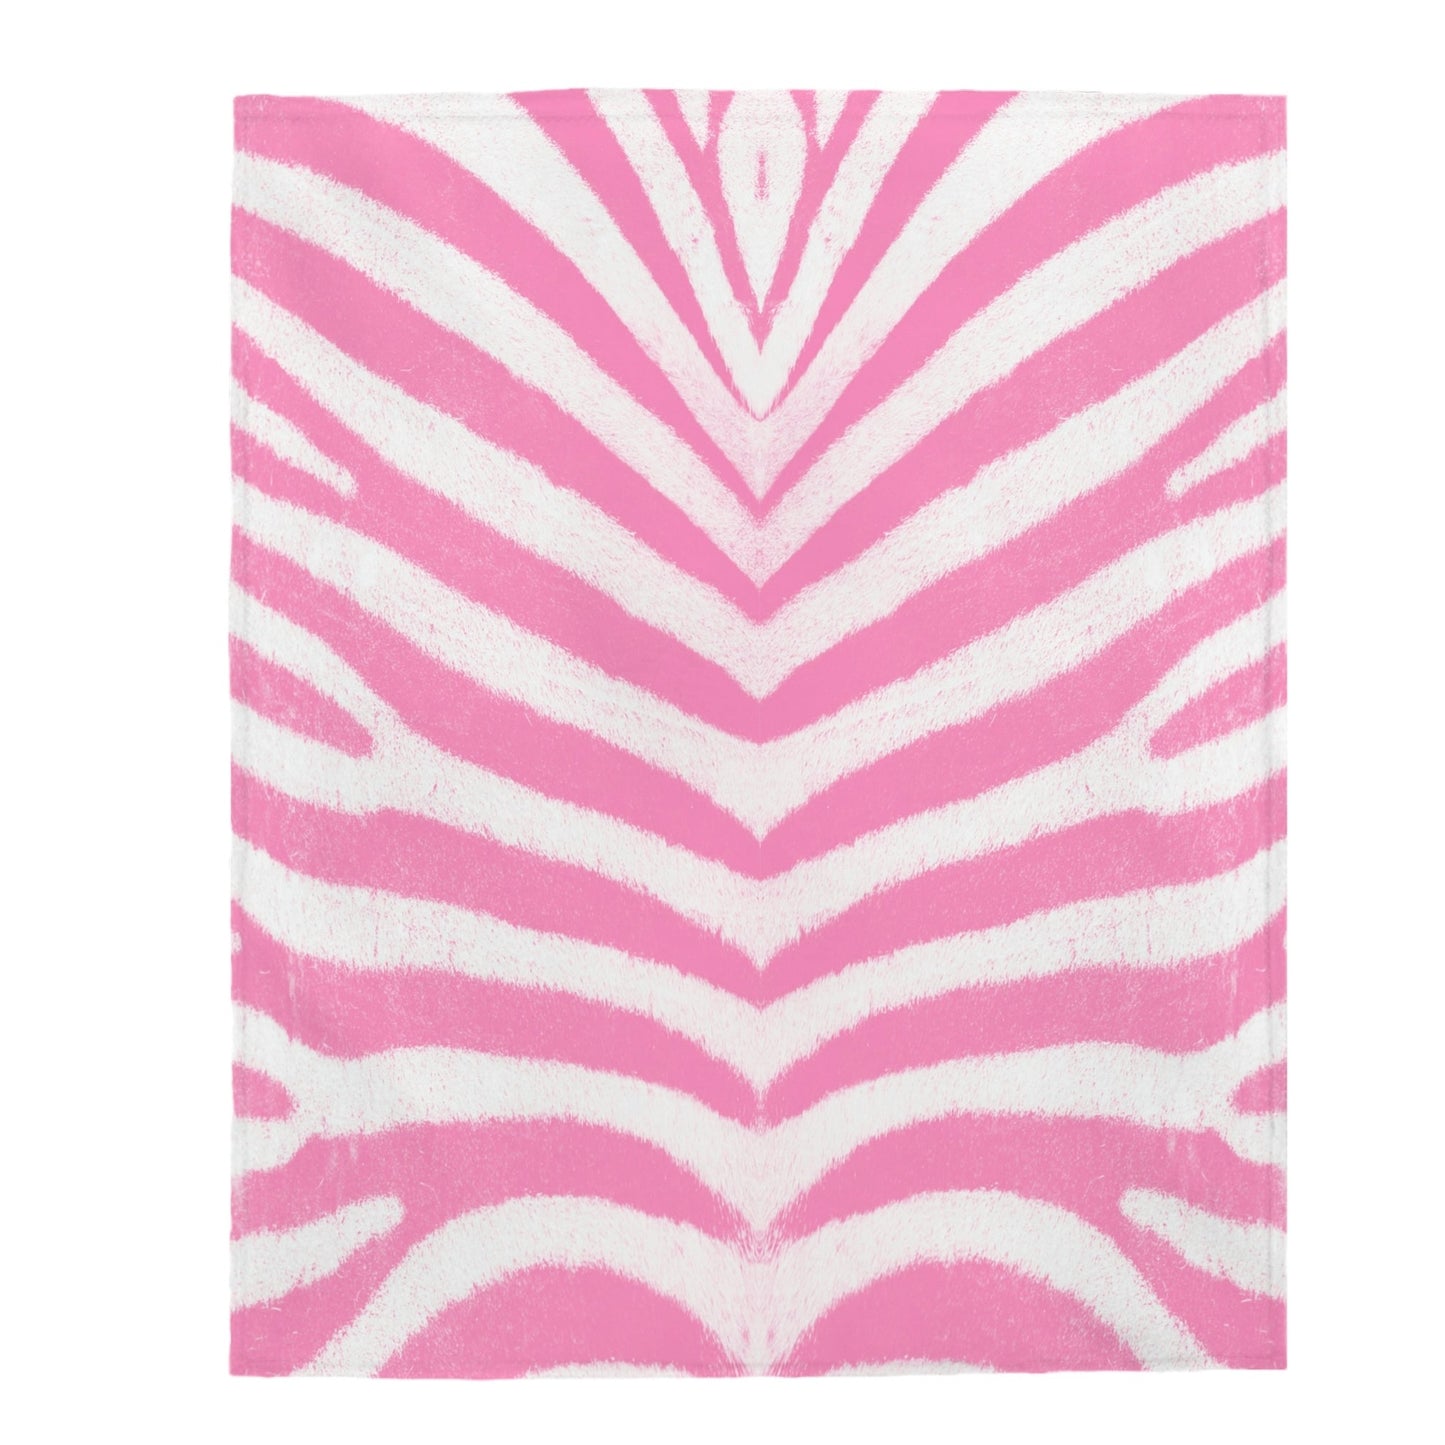 PINK AND WHITE STRIPED PLUSH BLANKET - BRYKNOLO LLC All Over Prints 50" × 60"